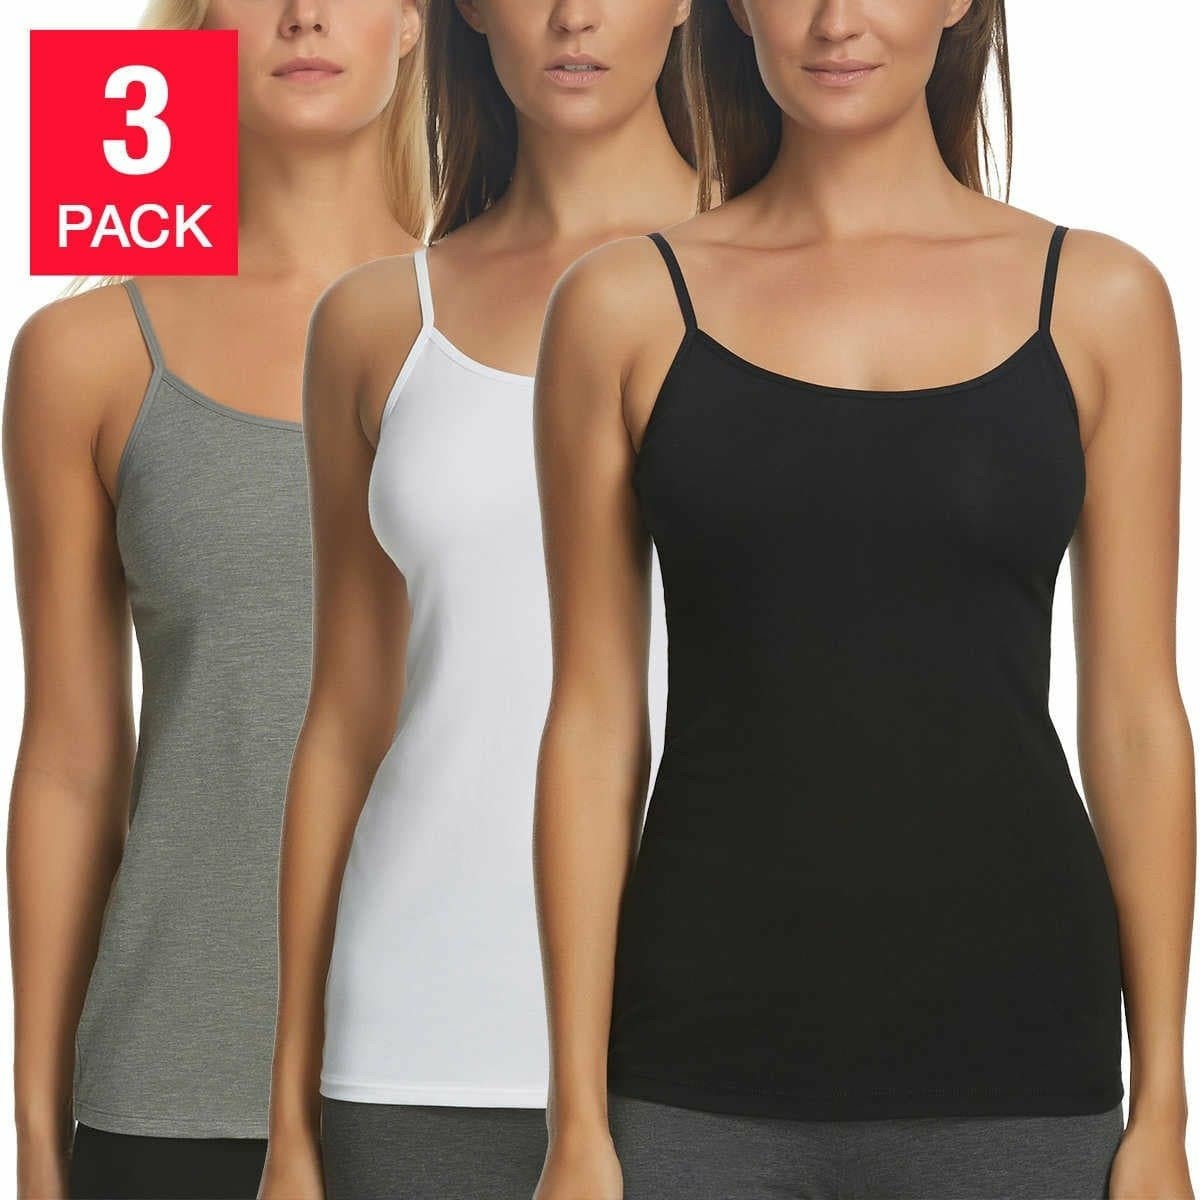 3 Pcs Assorted Women Basic Tank Tops_Soft, Comfortable, Breathable